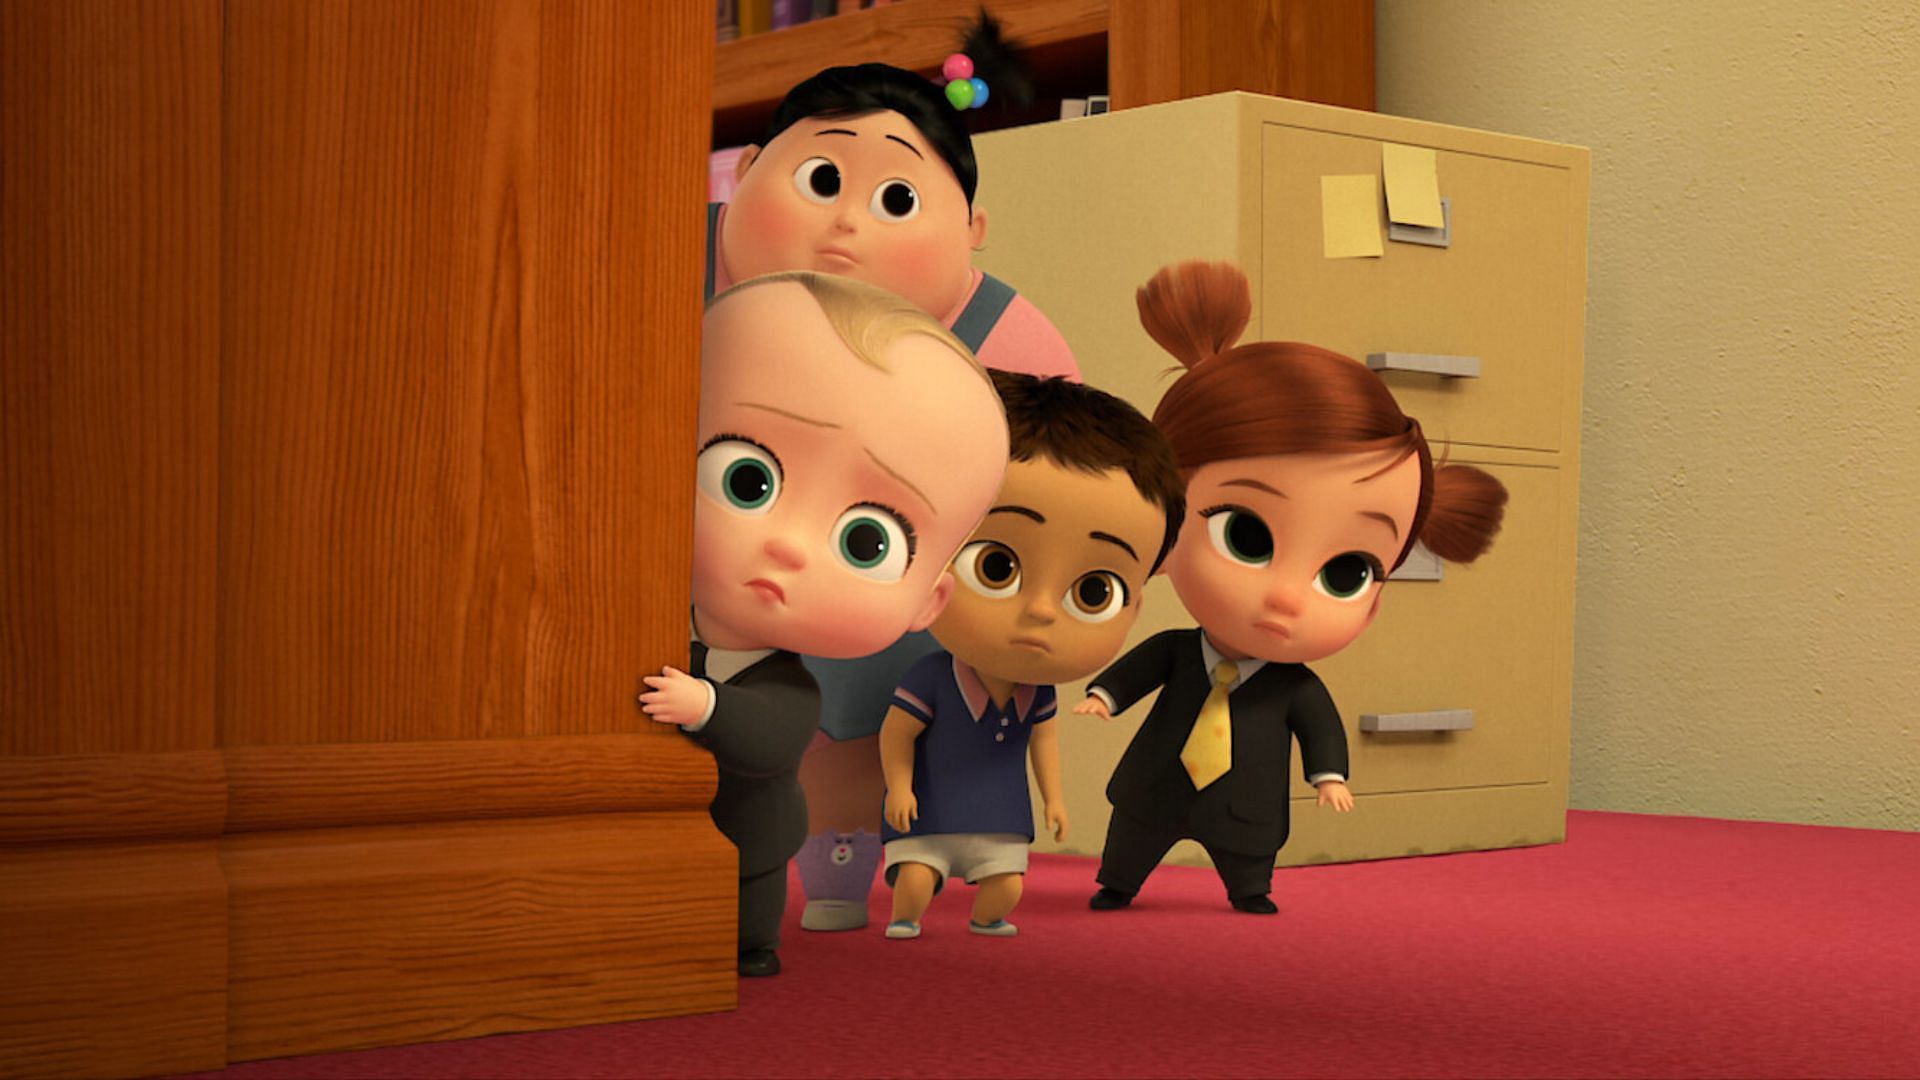 A still from The Boss Baby: Back in the Crib (Image via Netflix)